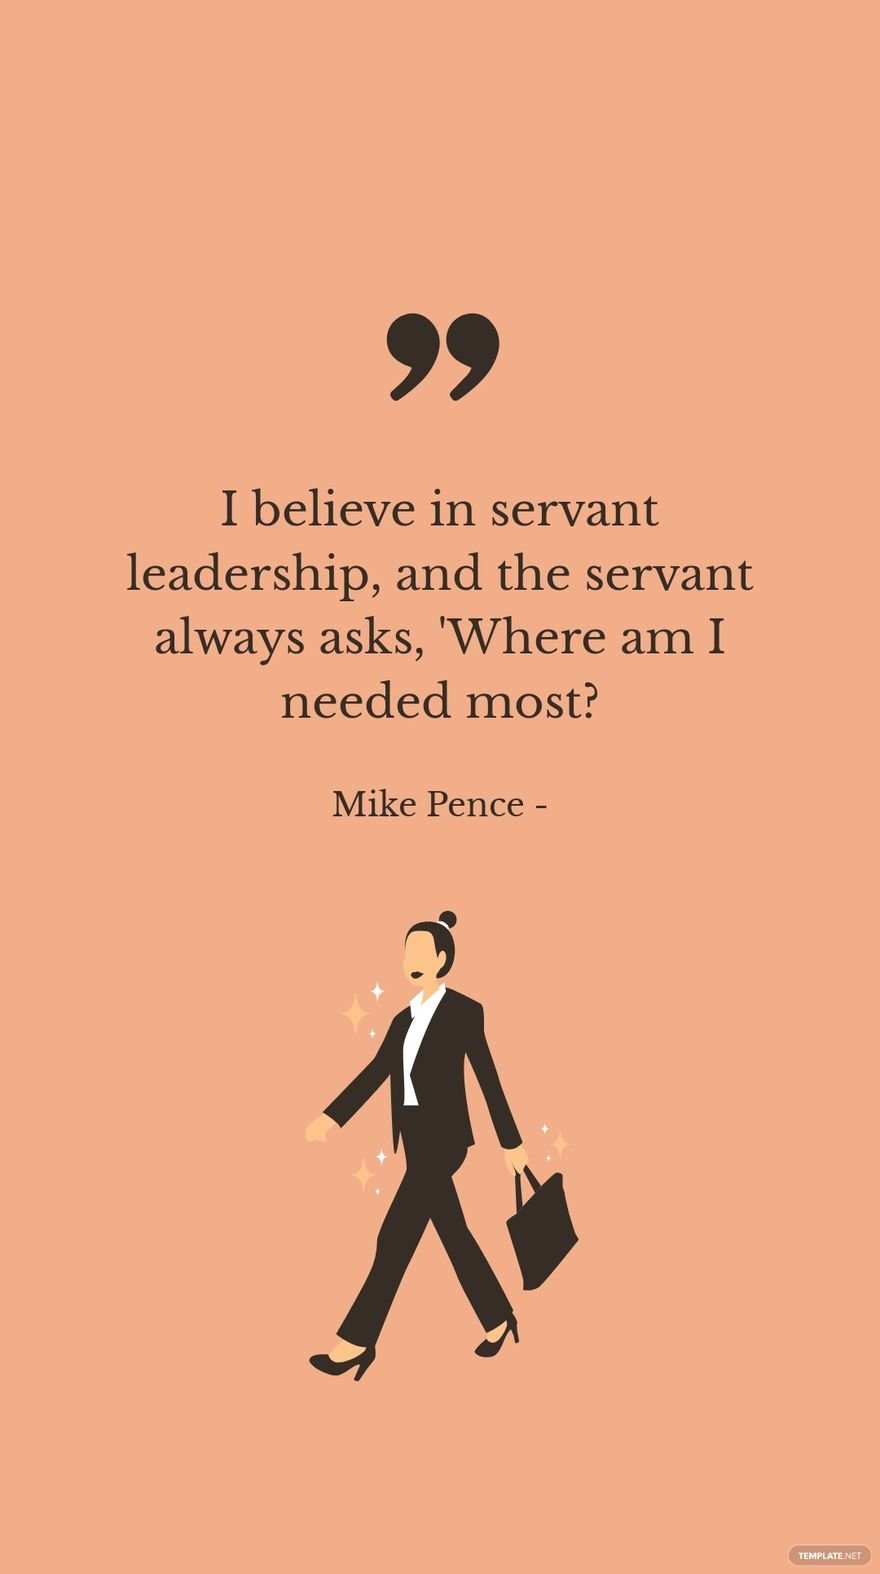 Mike Pence - I believe in servant leadership, and the servant always asks, 'Where am I needed most?